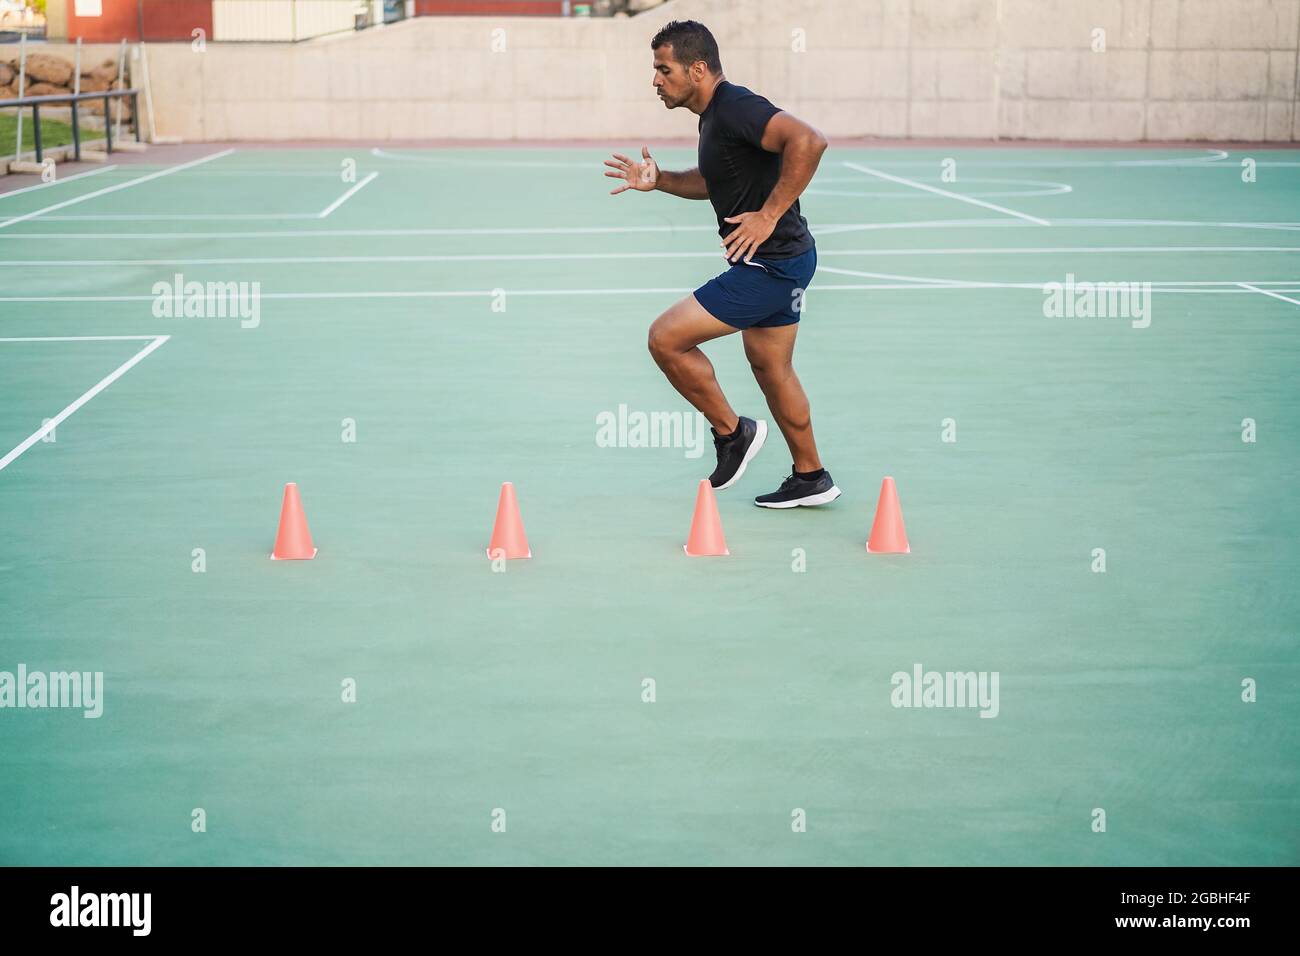 Hispanic man doing speed and agility cone drills workout session outdoors - Focus on man face Stock Photo